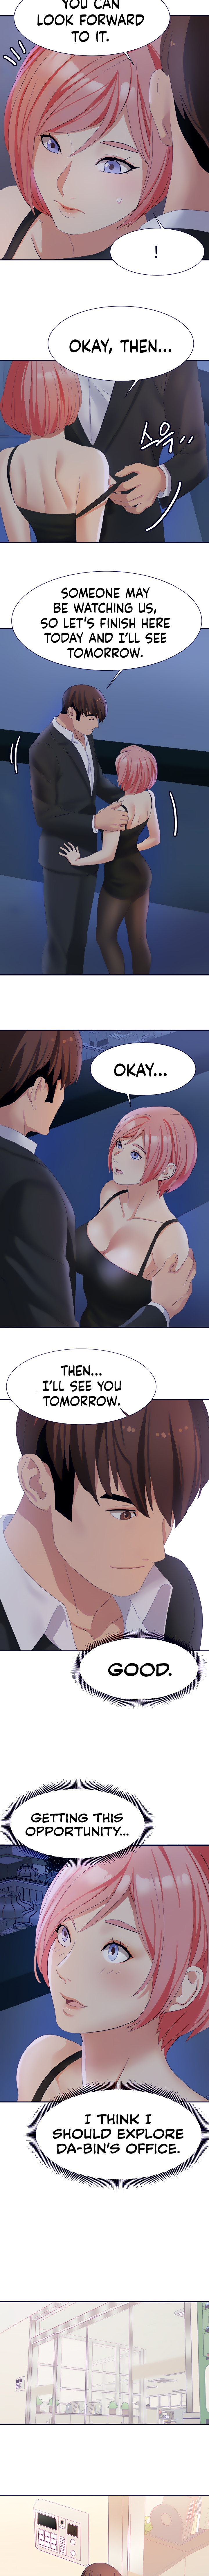 Punishments for Bad Girls - Chapter 25 Page 2